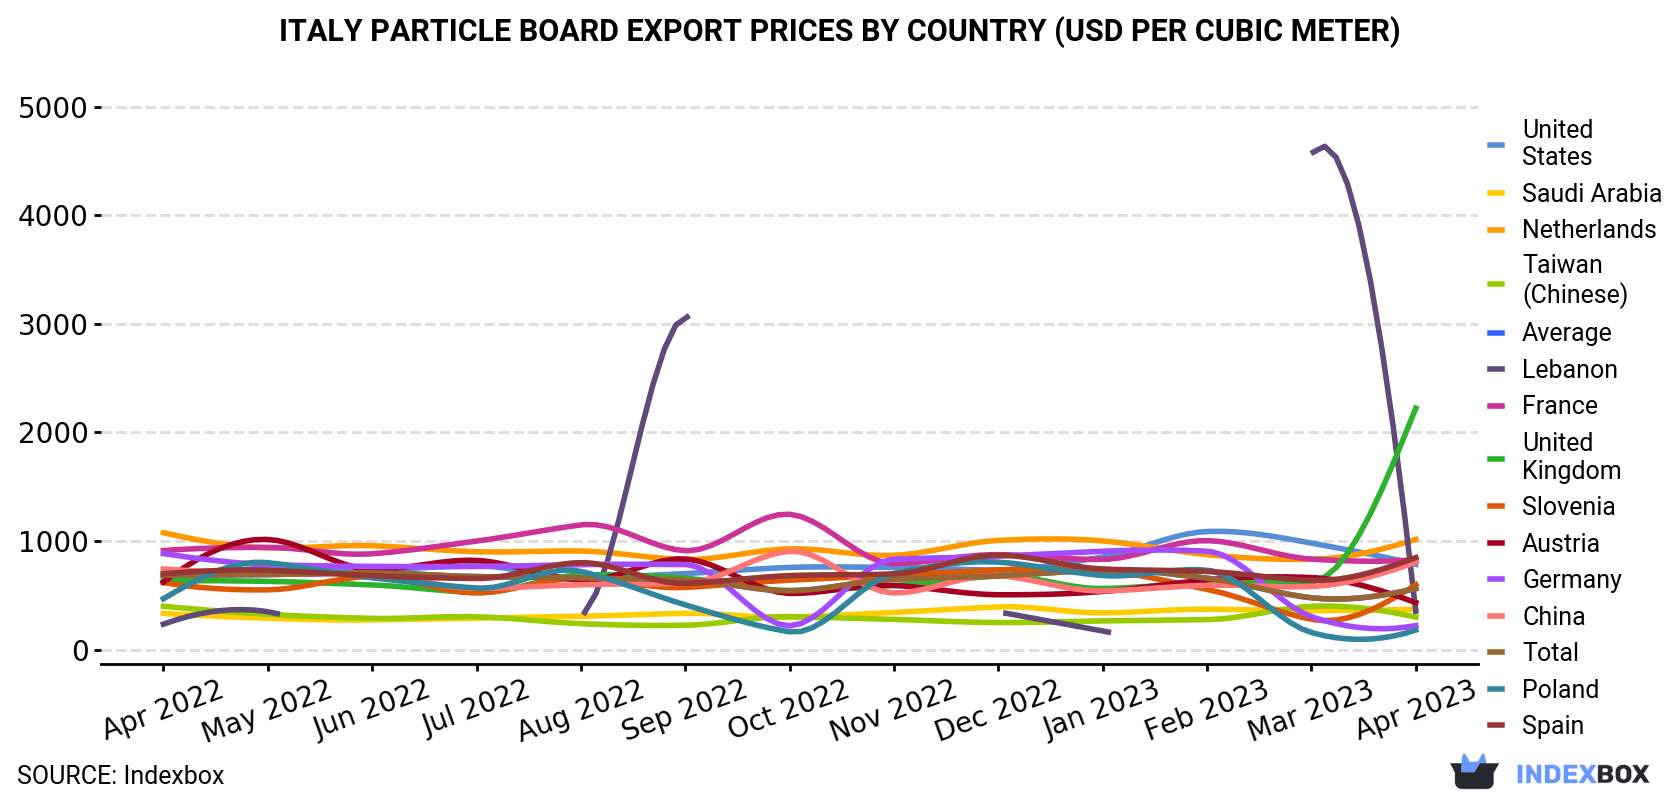 Italy Particle Board Export Prices By Country (USD Per Cubic Meter)